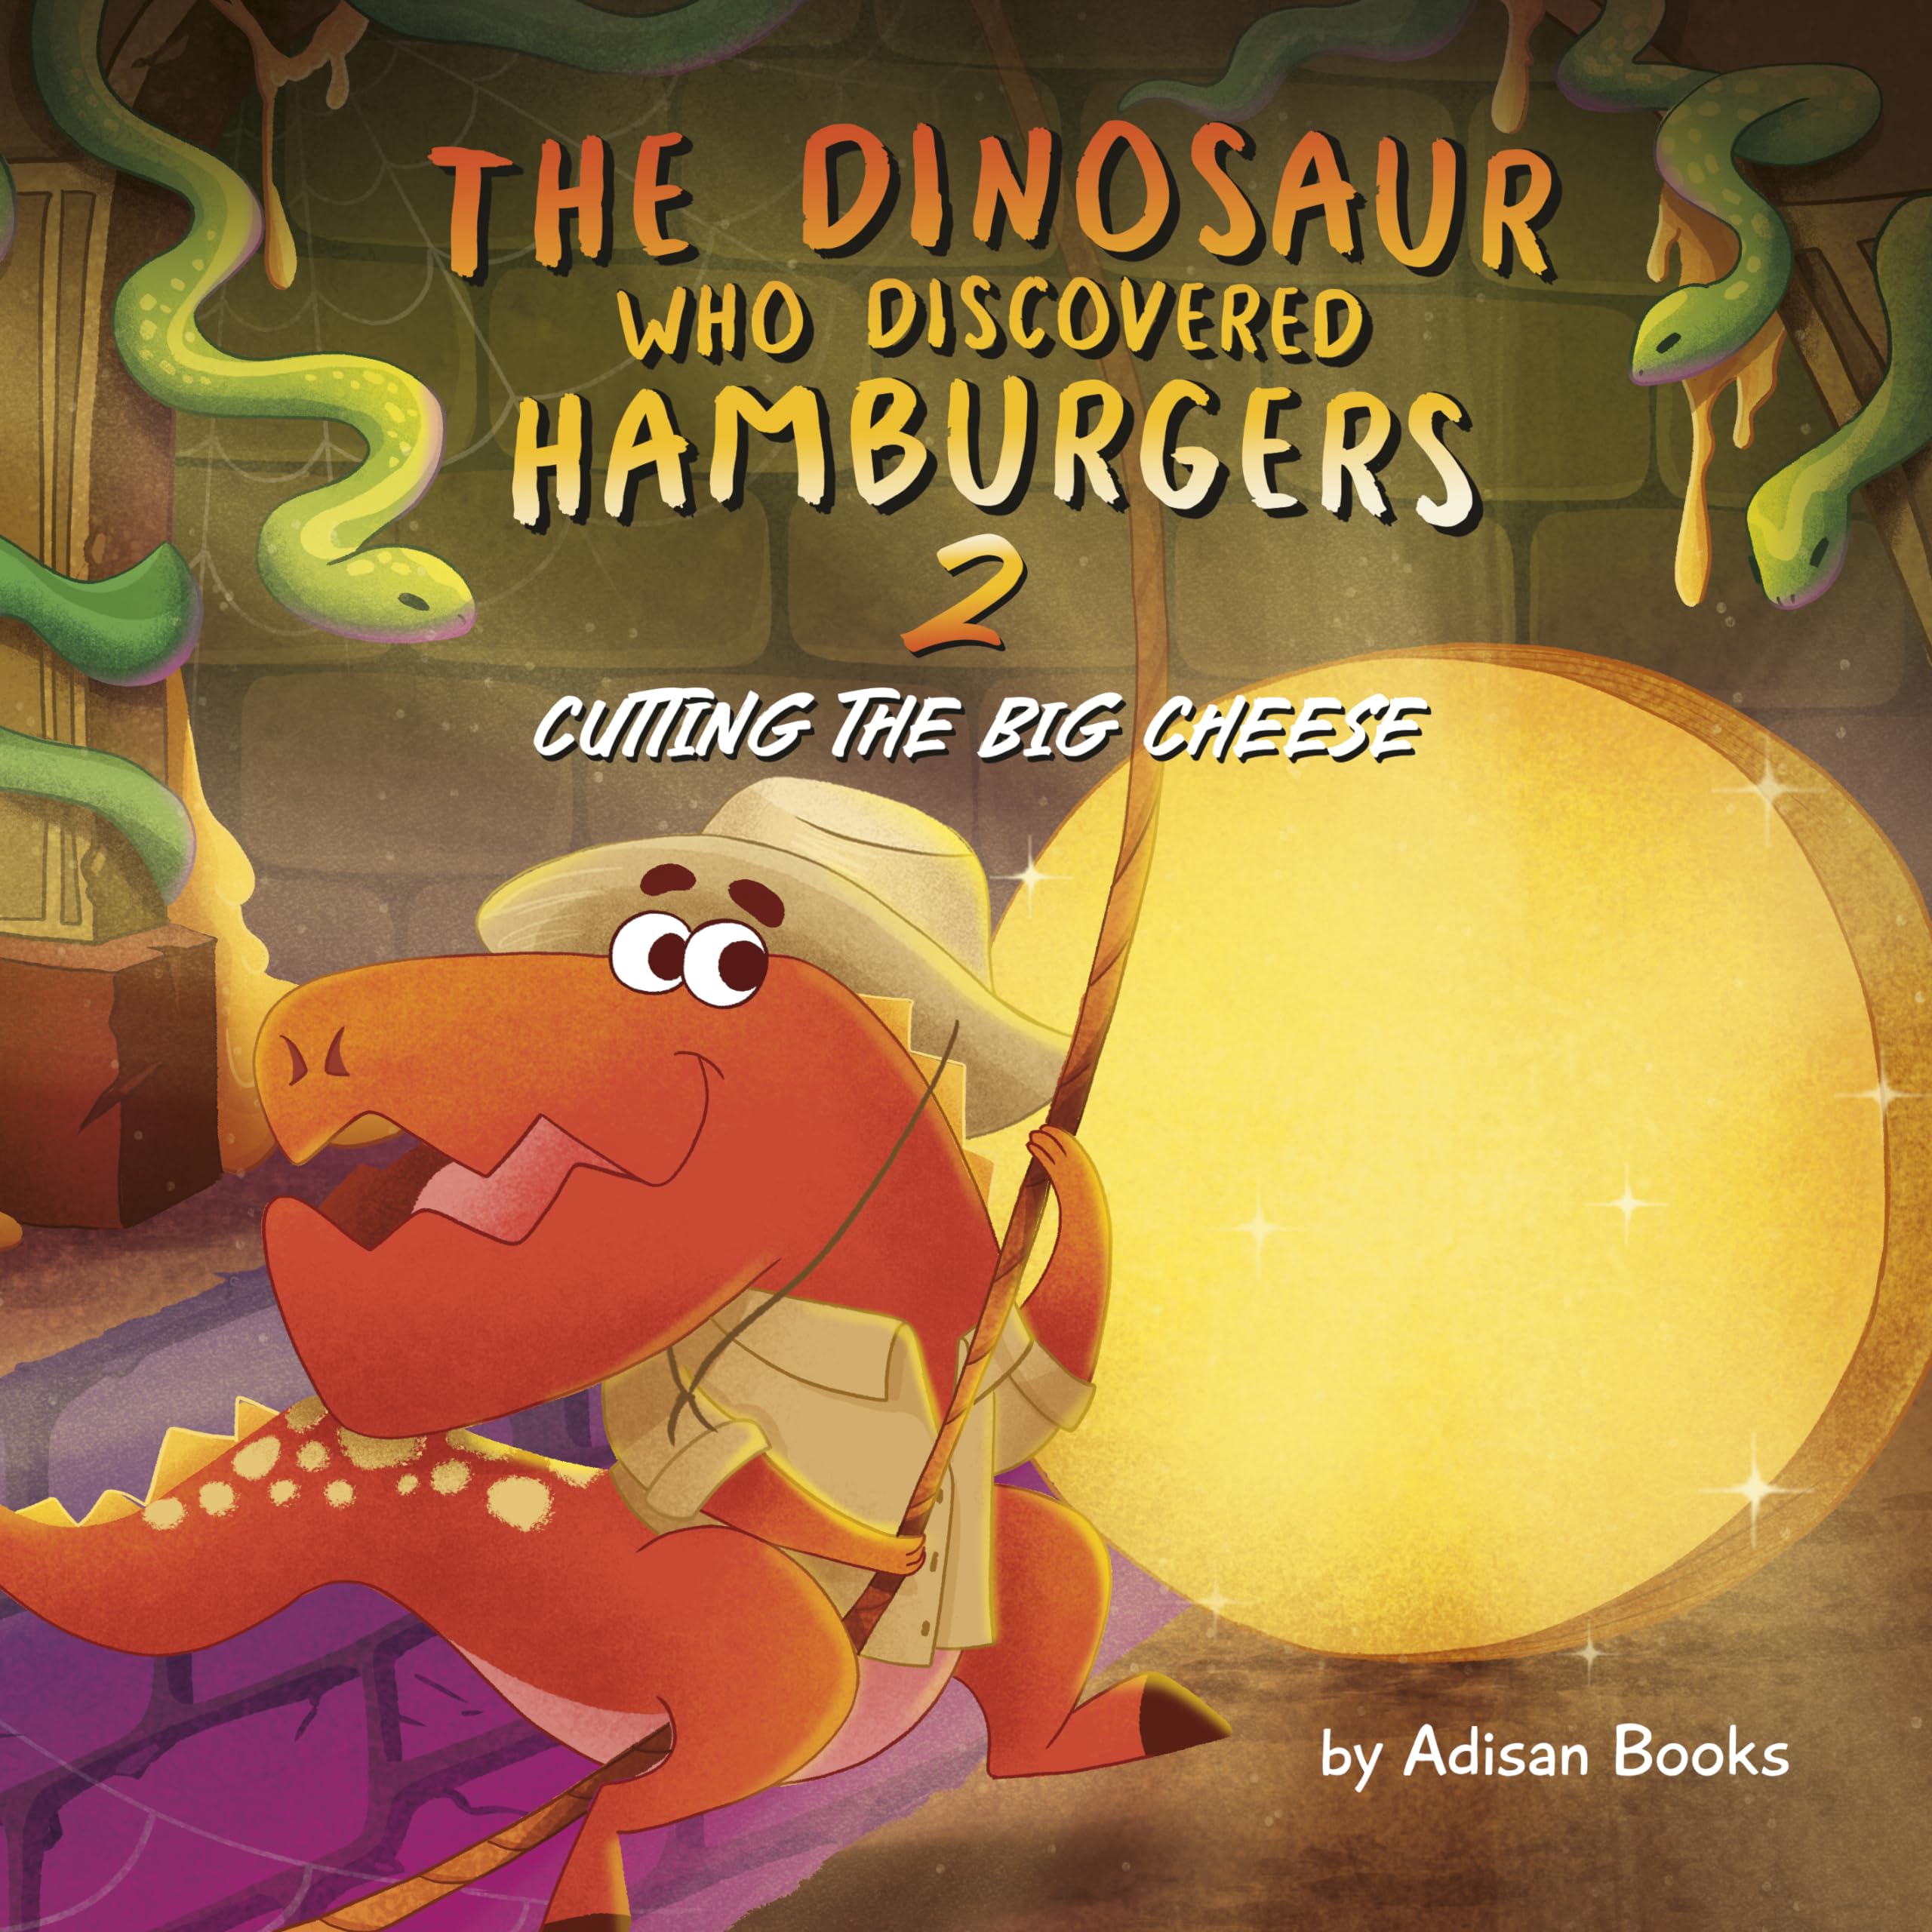 The Dinosaur Who Discovered Hamburgers 2: Cutting The Big Cheese (The Animal Who...)